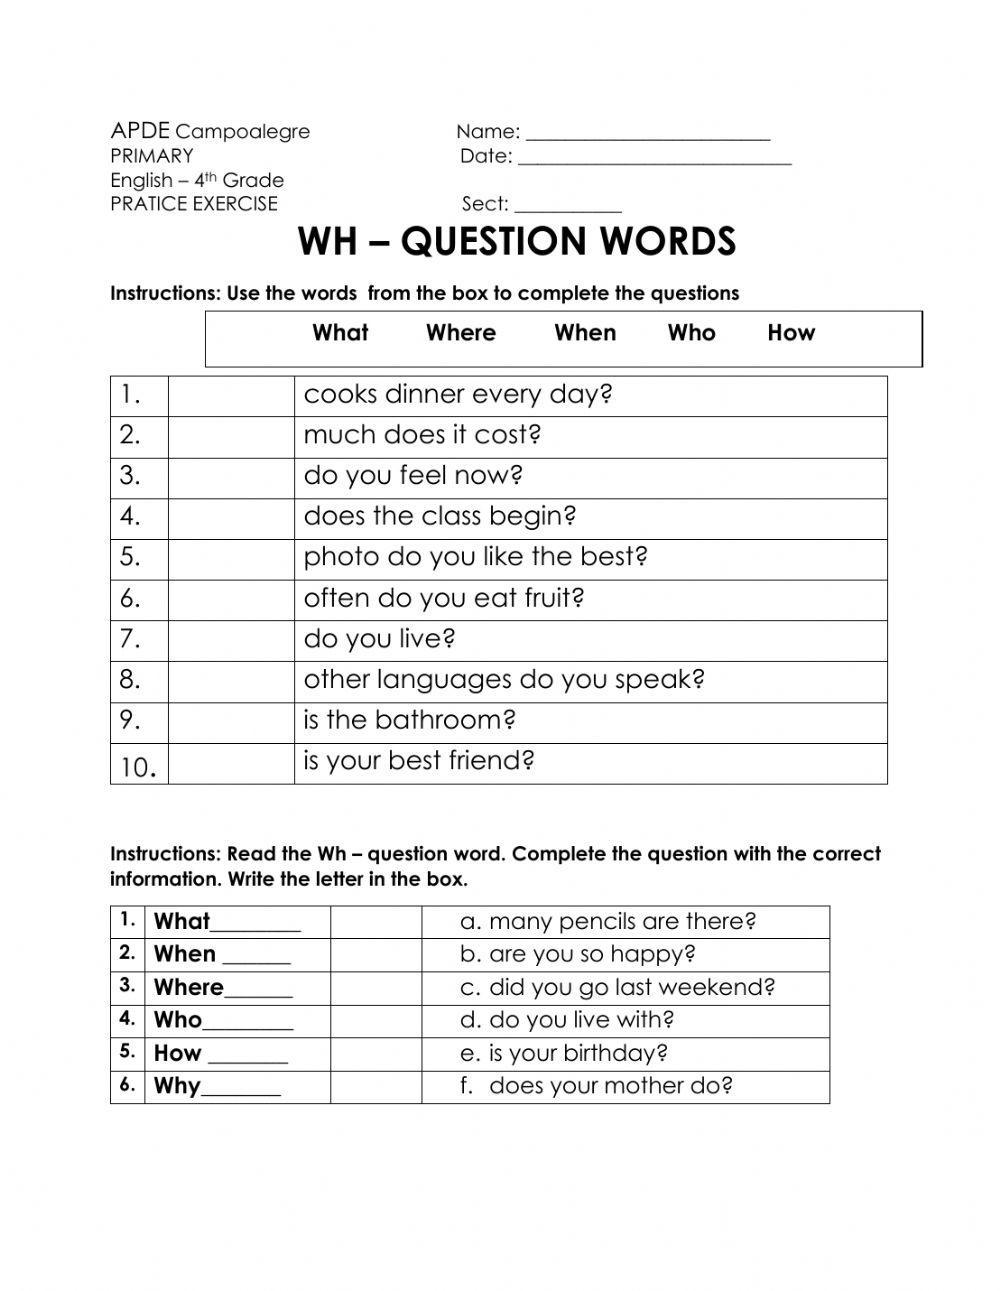 Wh-question words